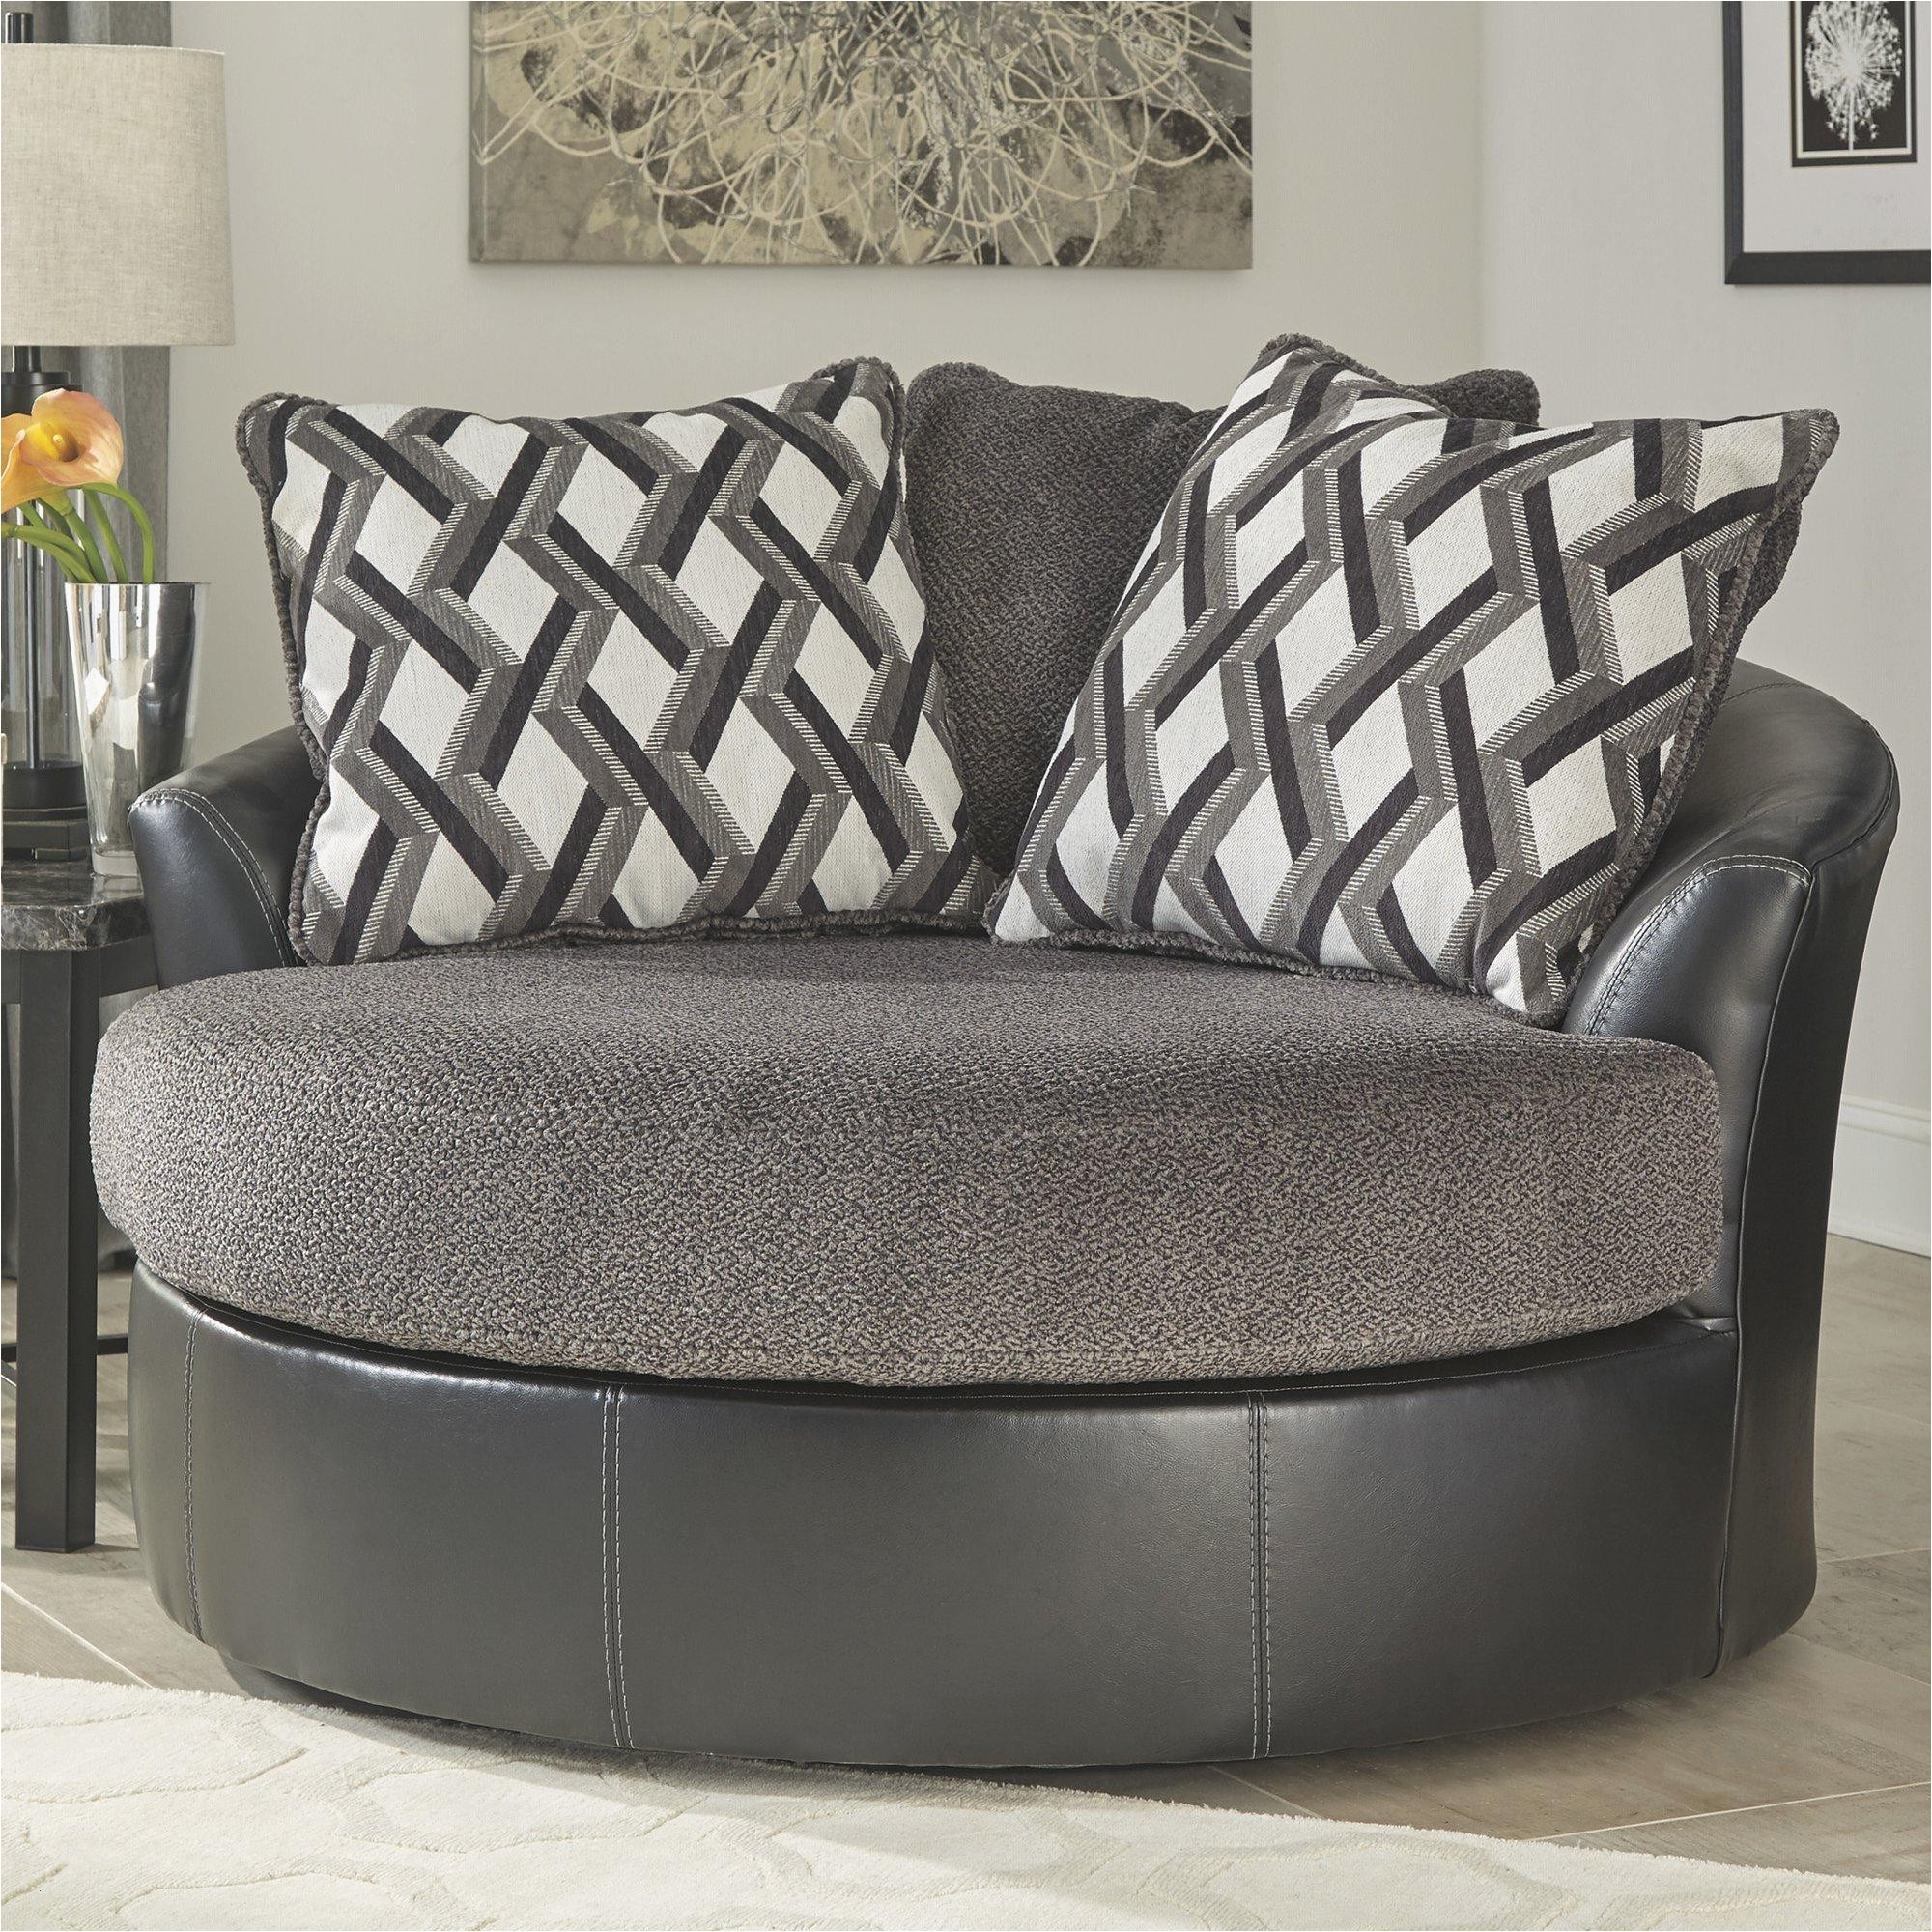 Wayfair Furniture Store Locations 27 Inspirational Wayfair Small sofas Pictures Everythingalyce Com